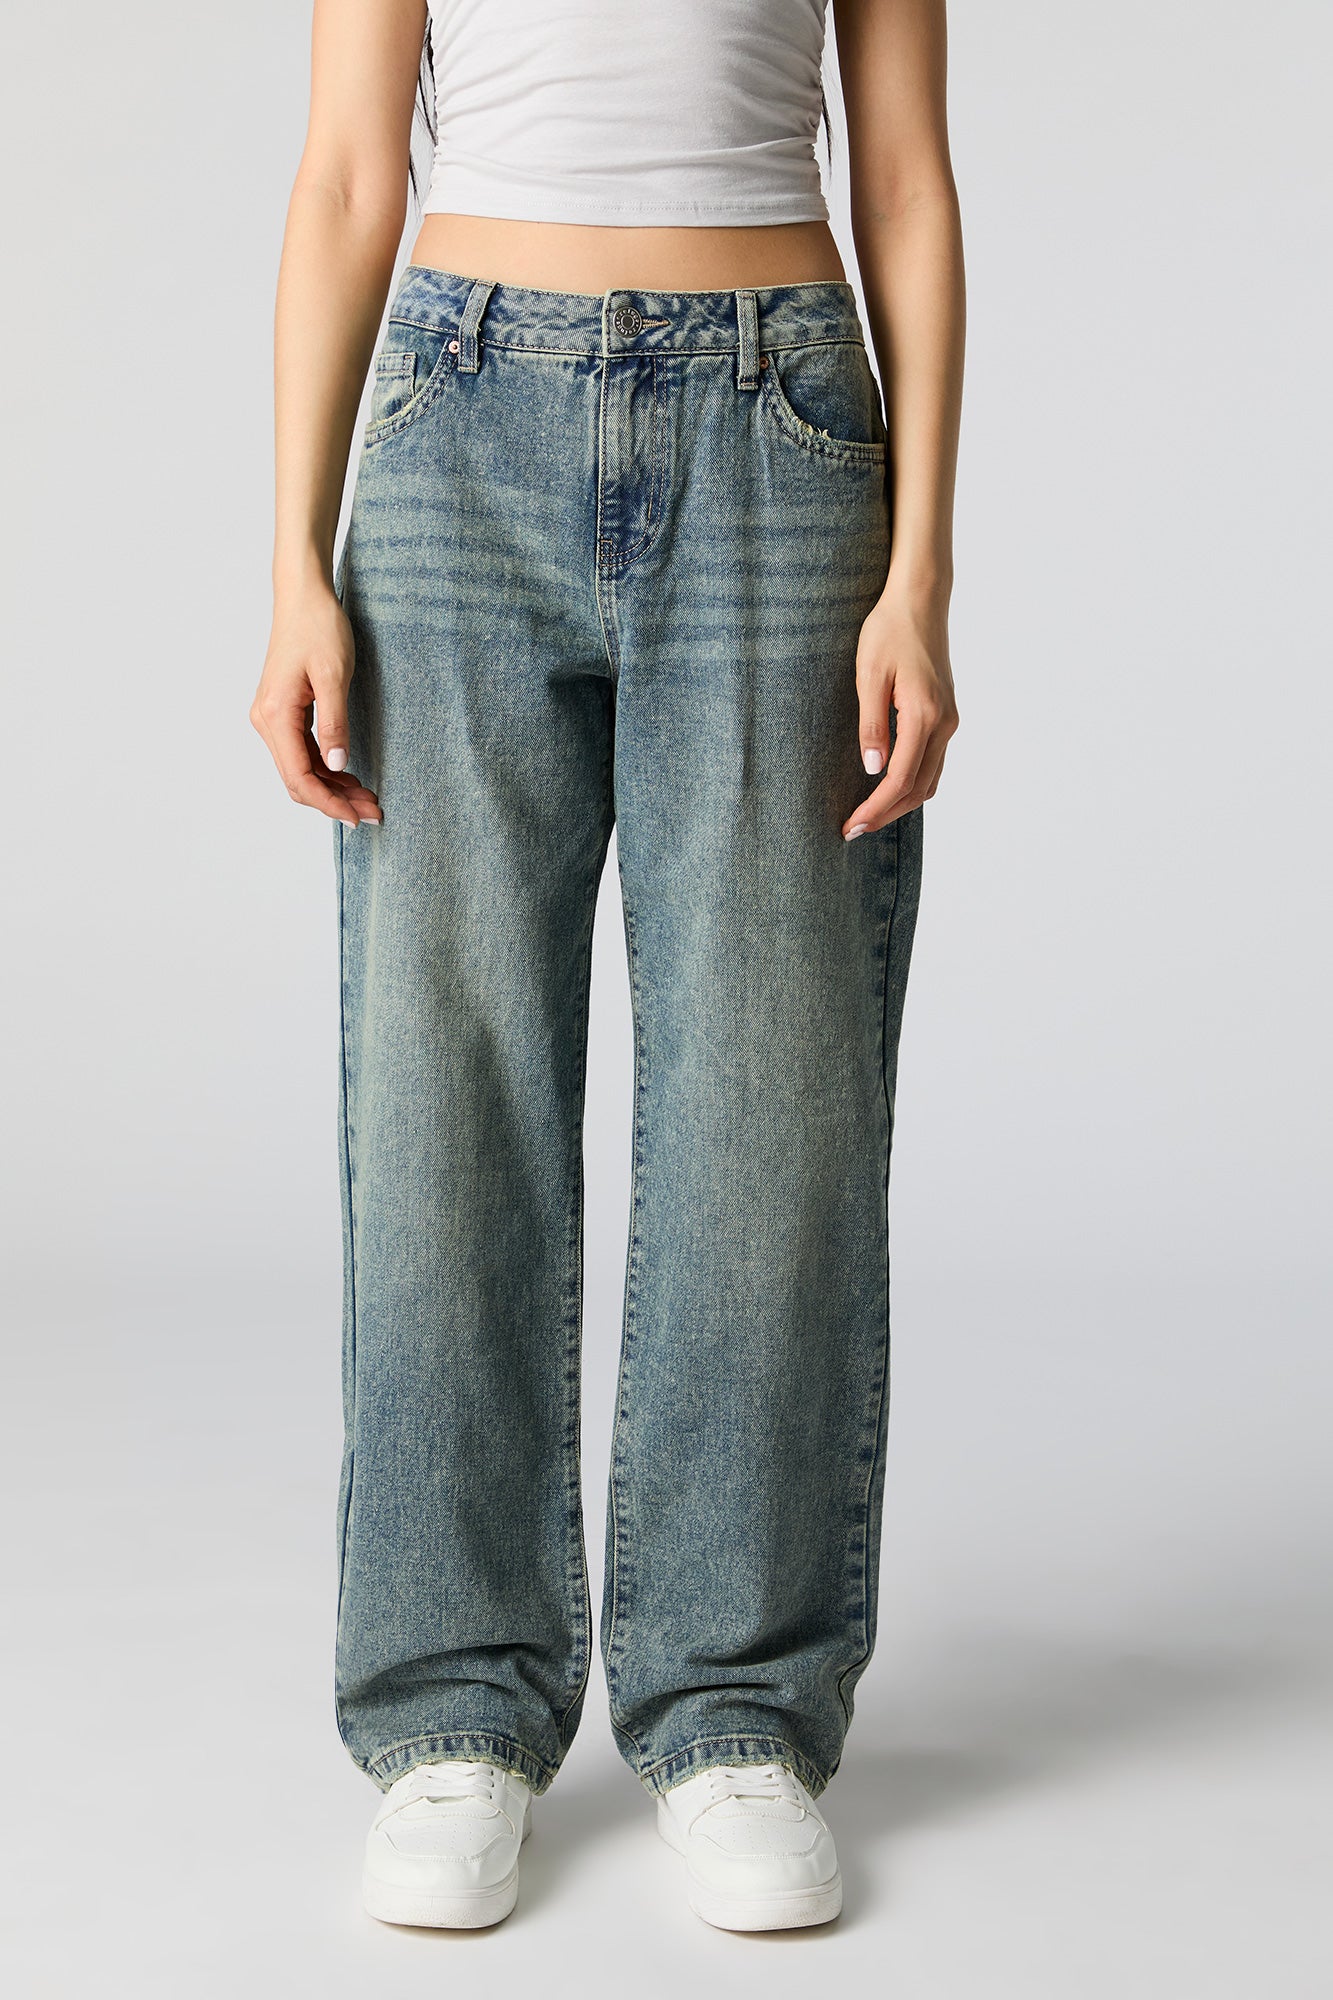 Vintage Blue Washed Mom Jeans Low Waist Baggy Style With Straight Leg And  Y2K Denim Wide Leg Trouser Jeans For Women Loose Fit 90s Style Style  #230427 From Kong003, $25.33